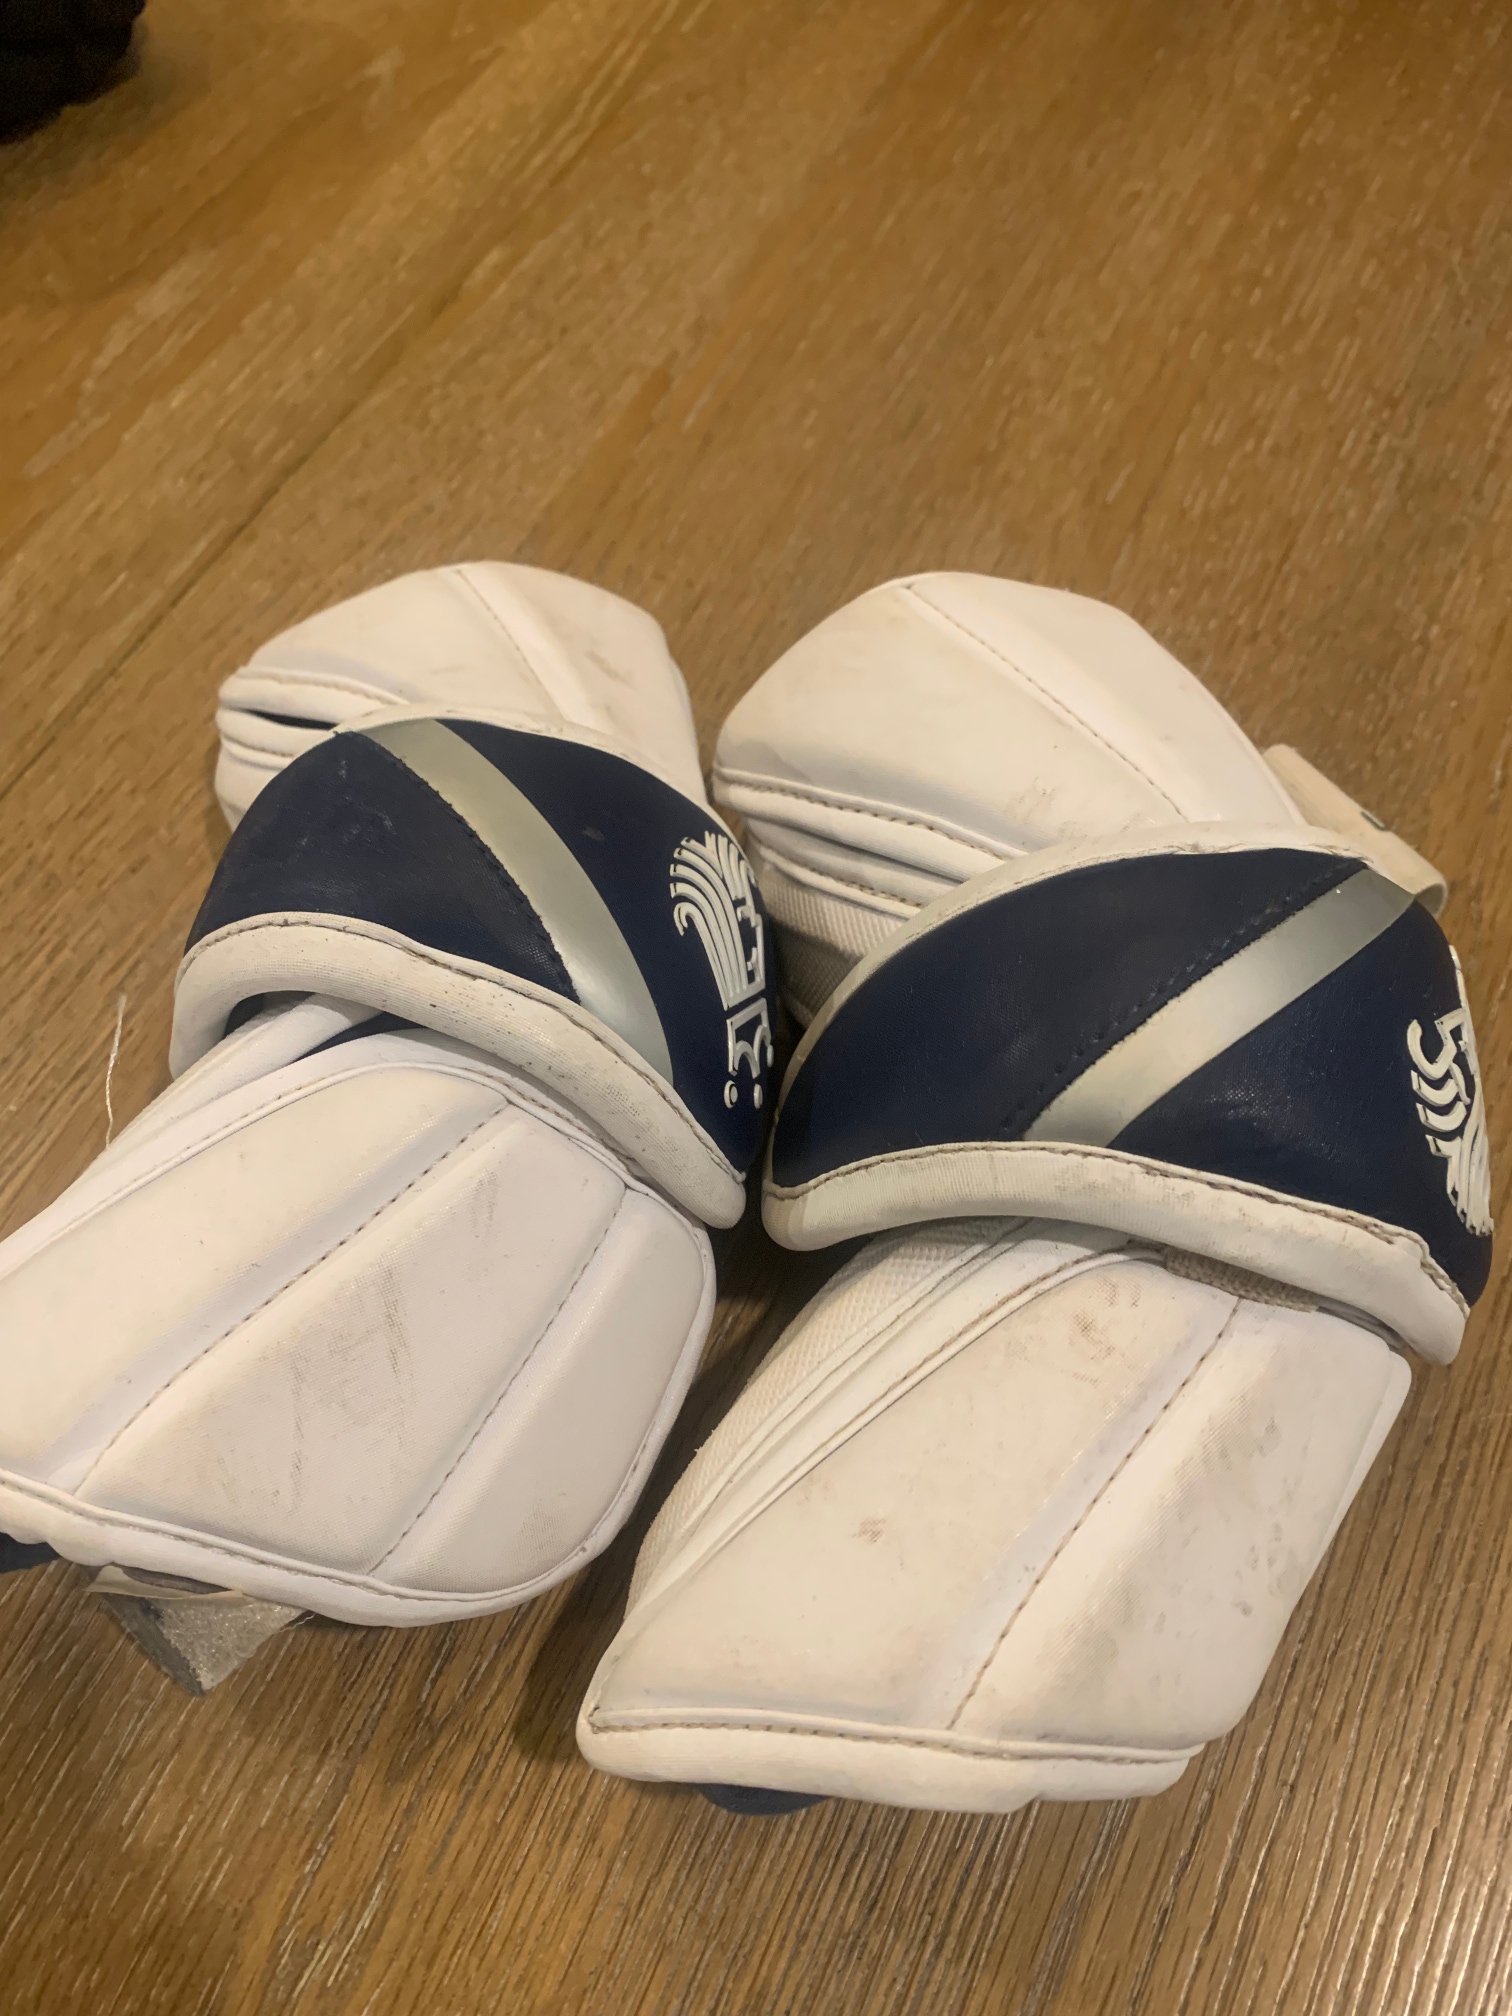 Youth Used Small Brine King Arm Pads